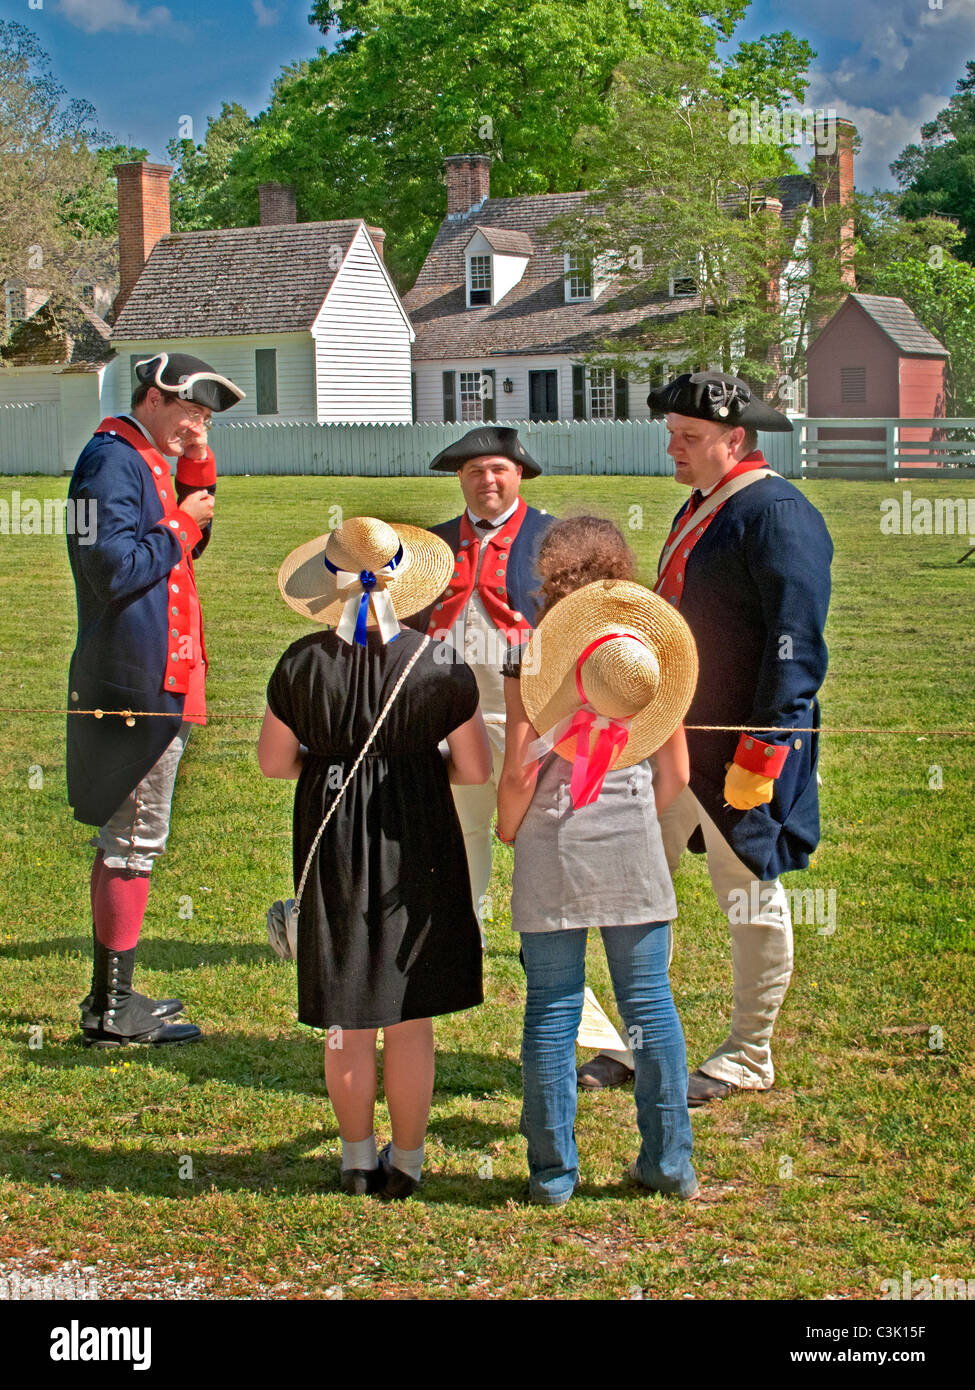 Wearing historic uniforms, reenactors portraying soldiers talking with tourists in Colonial Williamsburg, VA. Stock Photo